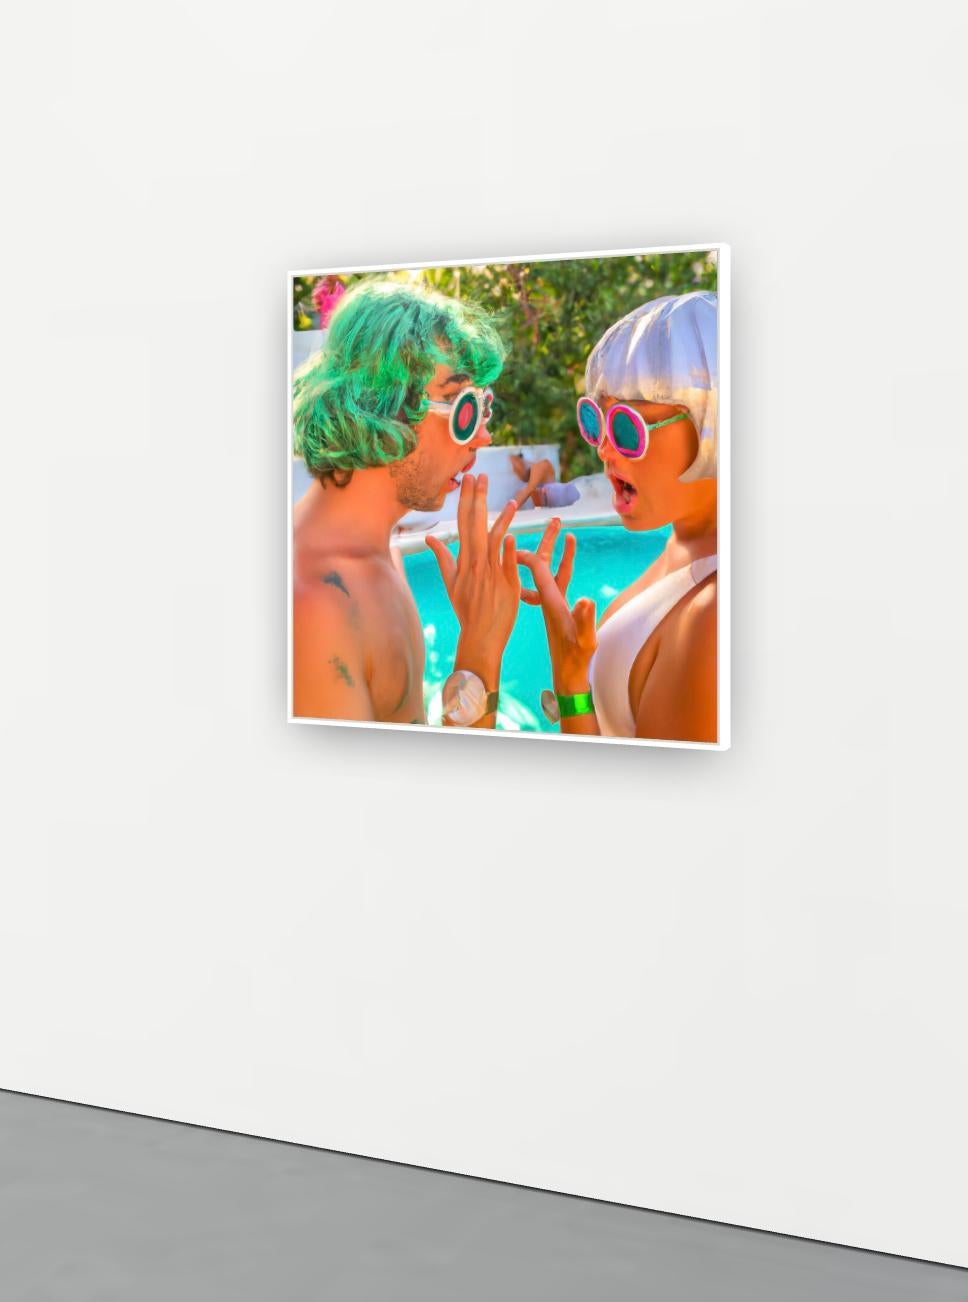 Poolside Party #18 (Naiades Series 1)
The Infinite Conversation after Maurice Blanchet
2023
Archival pigment on canvas
150 x 150 cm / 59 x 59 inches
Signed, titled and dated on verso 
Edition of 1

Lee Wells (b.1971) is a conceptual artist whose